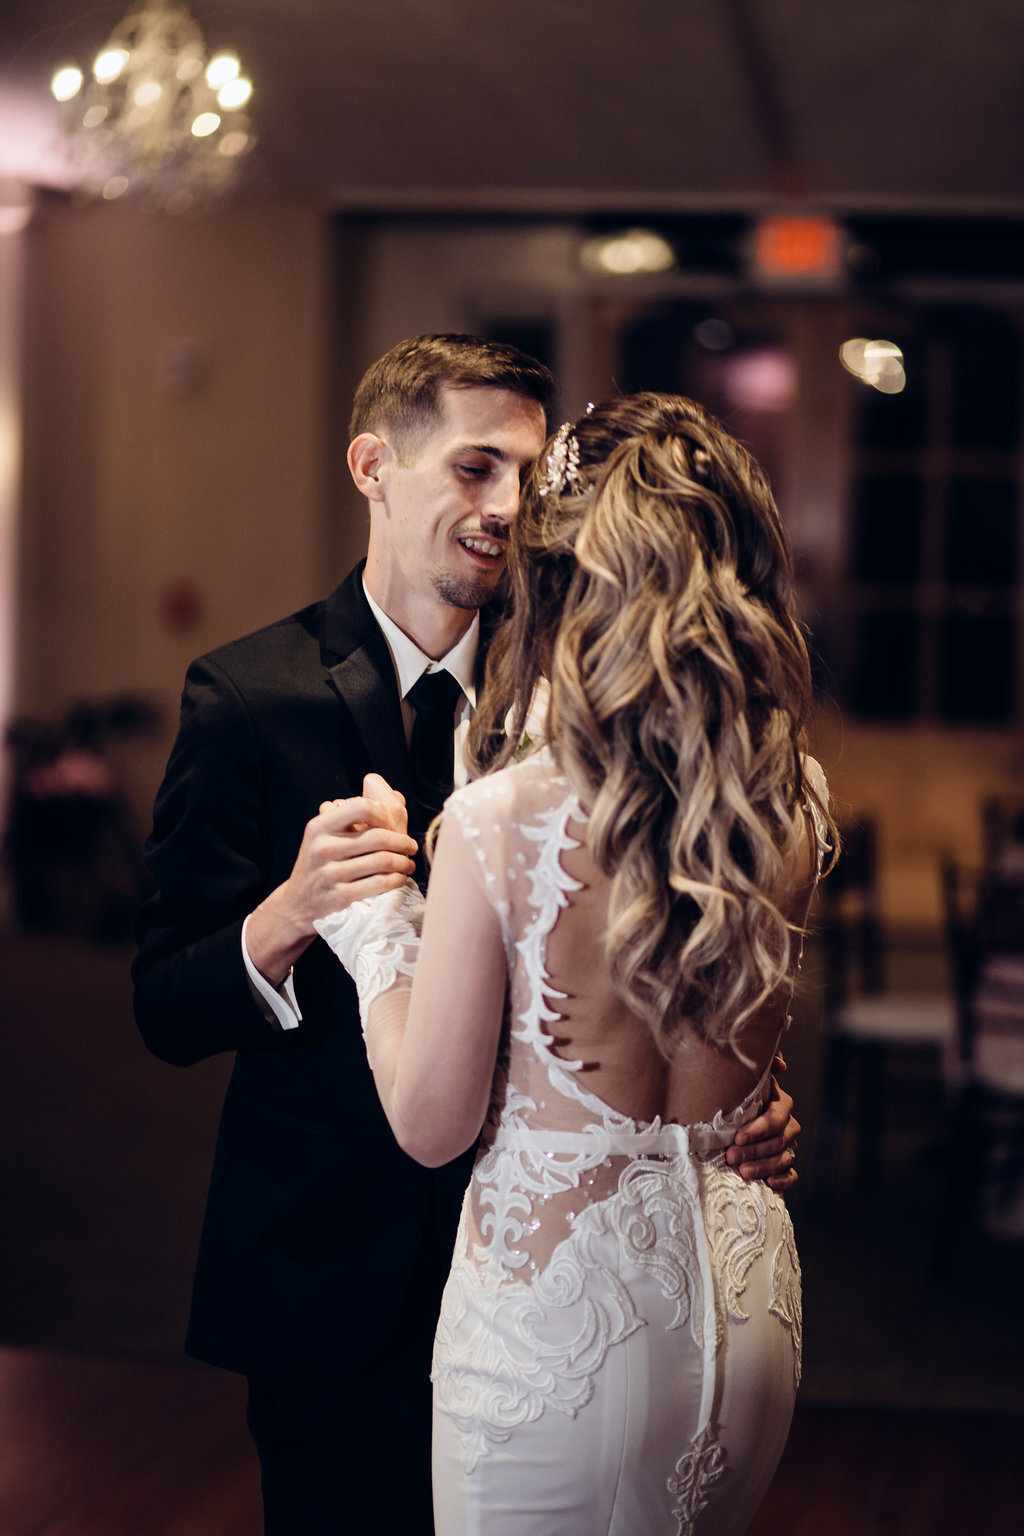 Wedding Photograph Of Groom Smiling While Dancing With His Bride Los Angeles